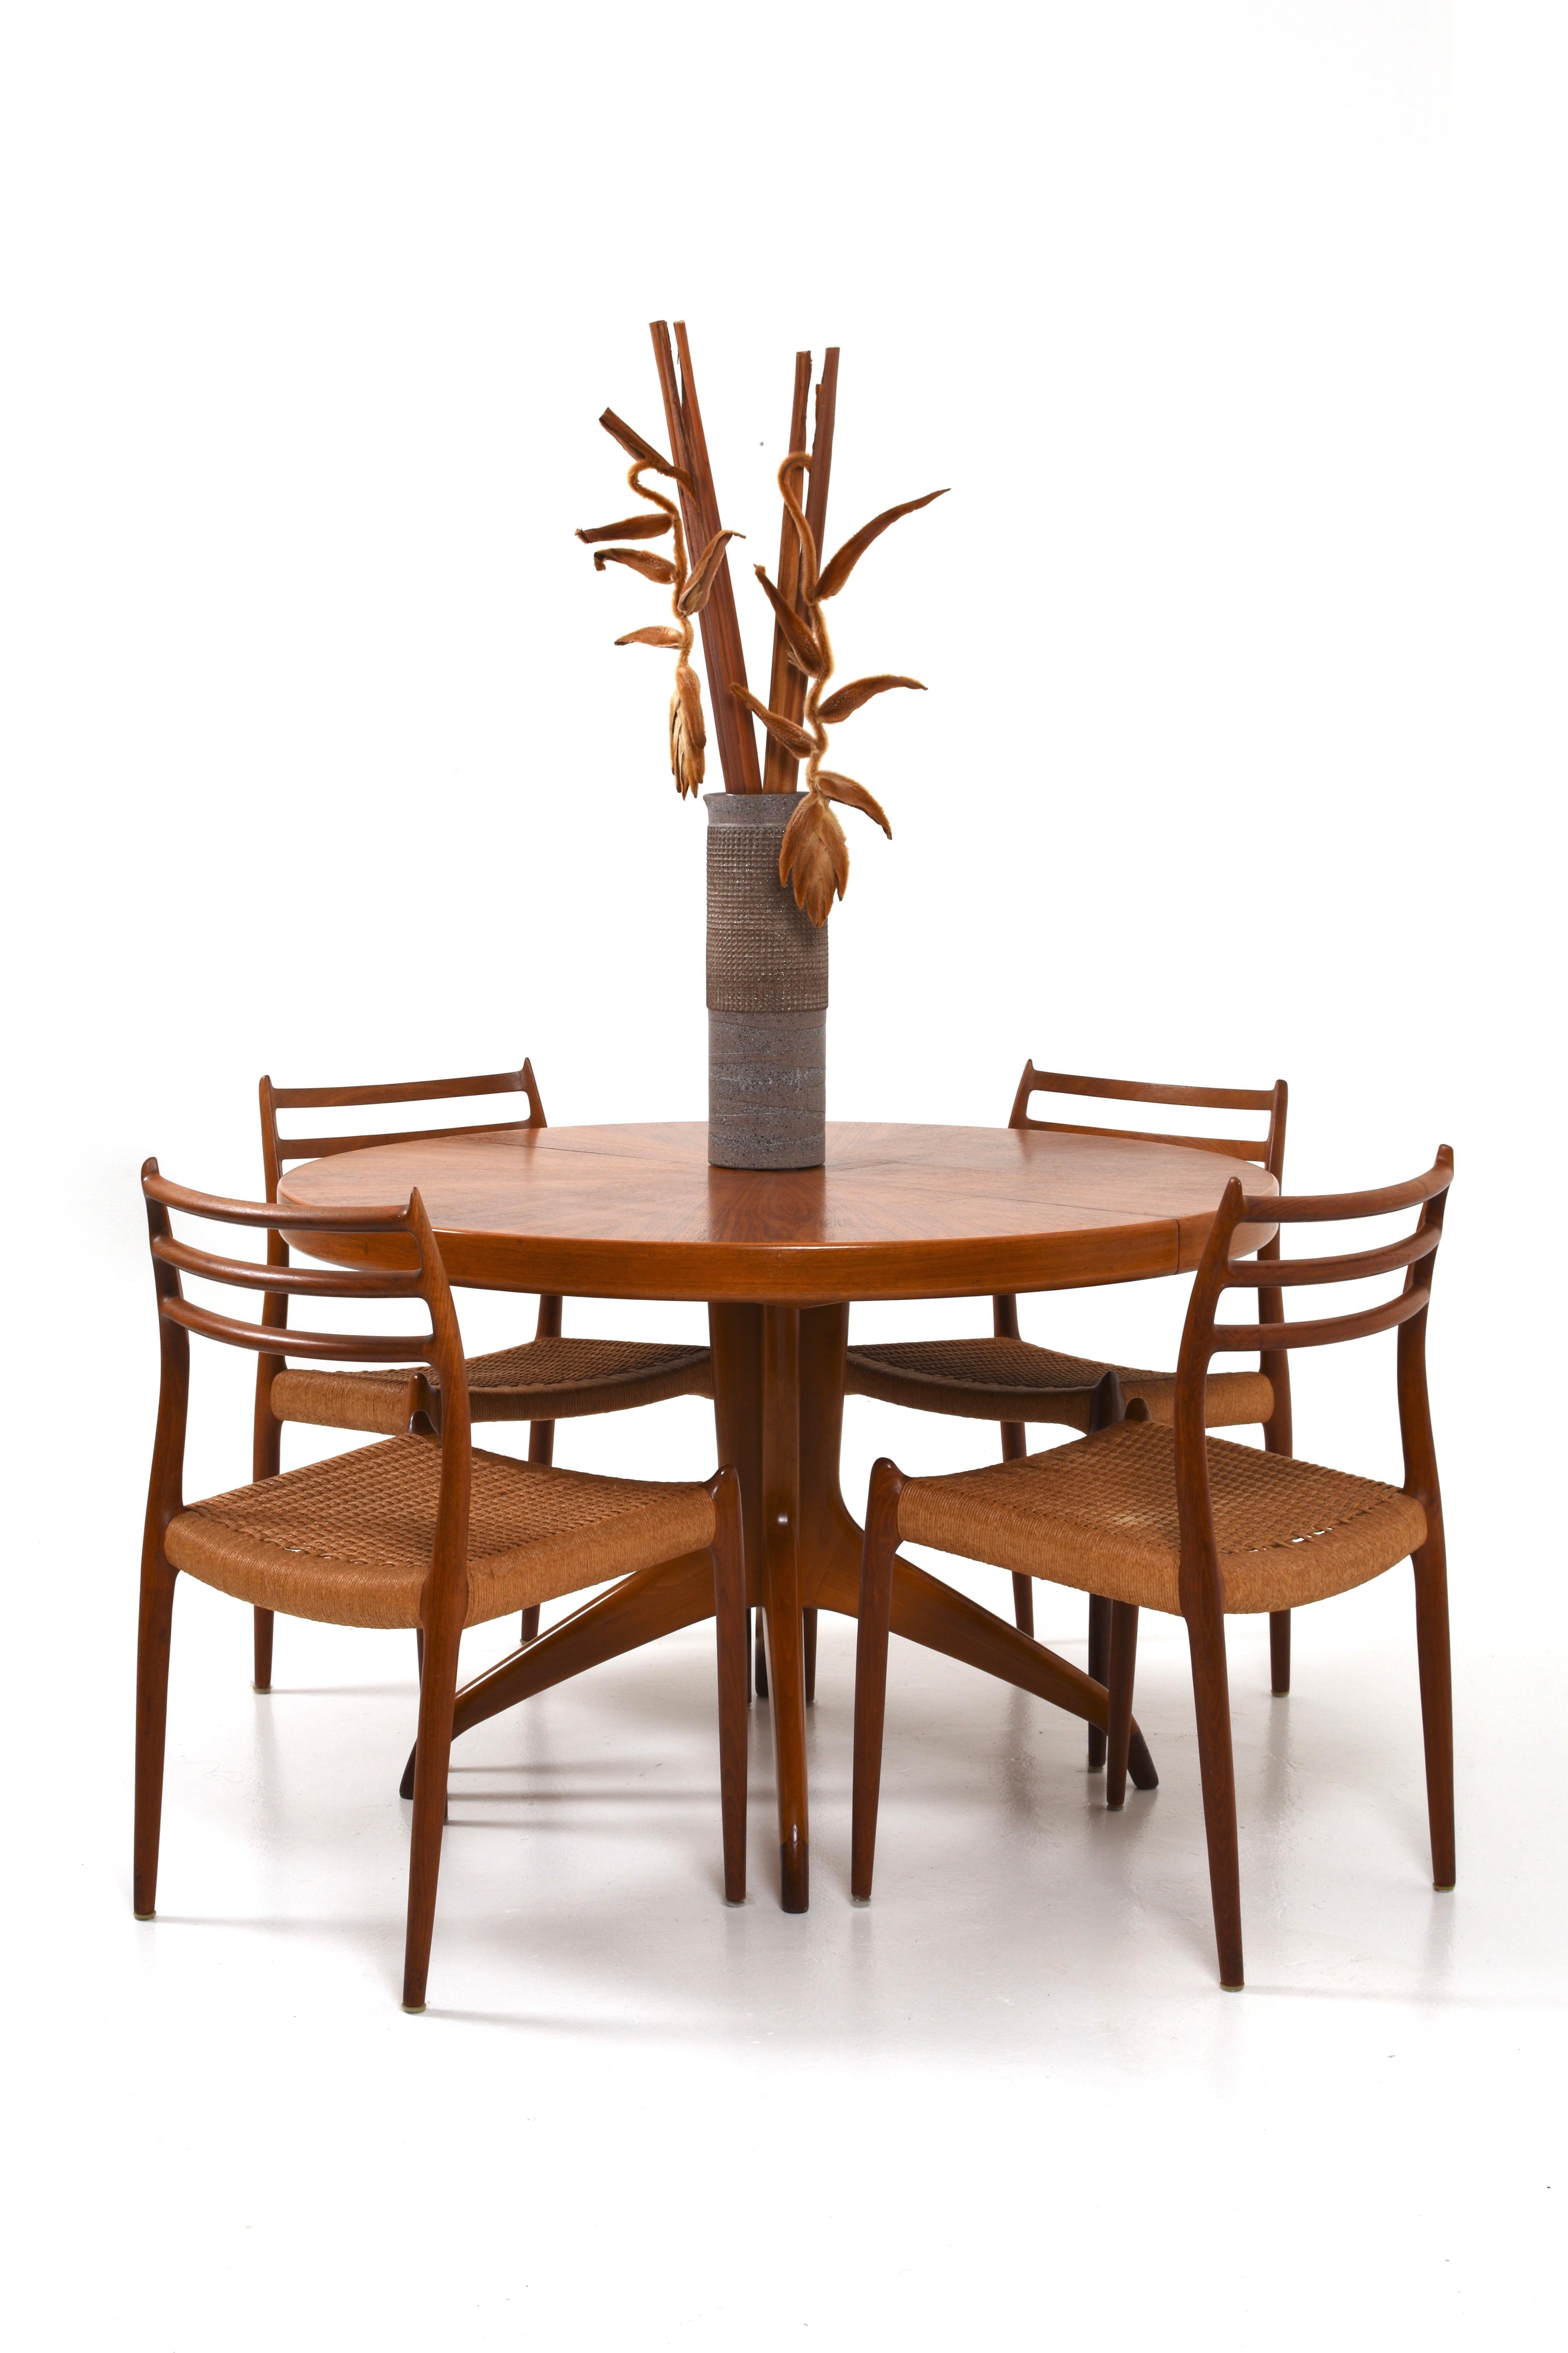 This elegant dining table from Westbergs Möbler in Tranås was manufactured in the 1950s and exudes a timeless style and high quality. The top is veneered with teak, which gives a beautiful and natural look that fits perfectly in most homes.

The